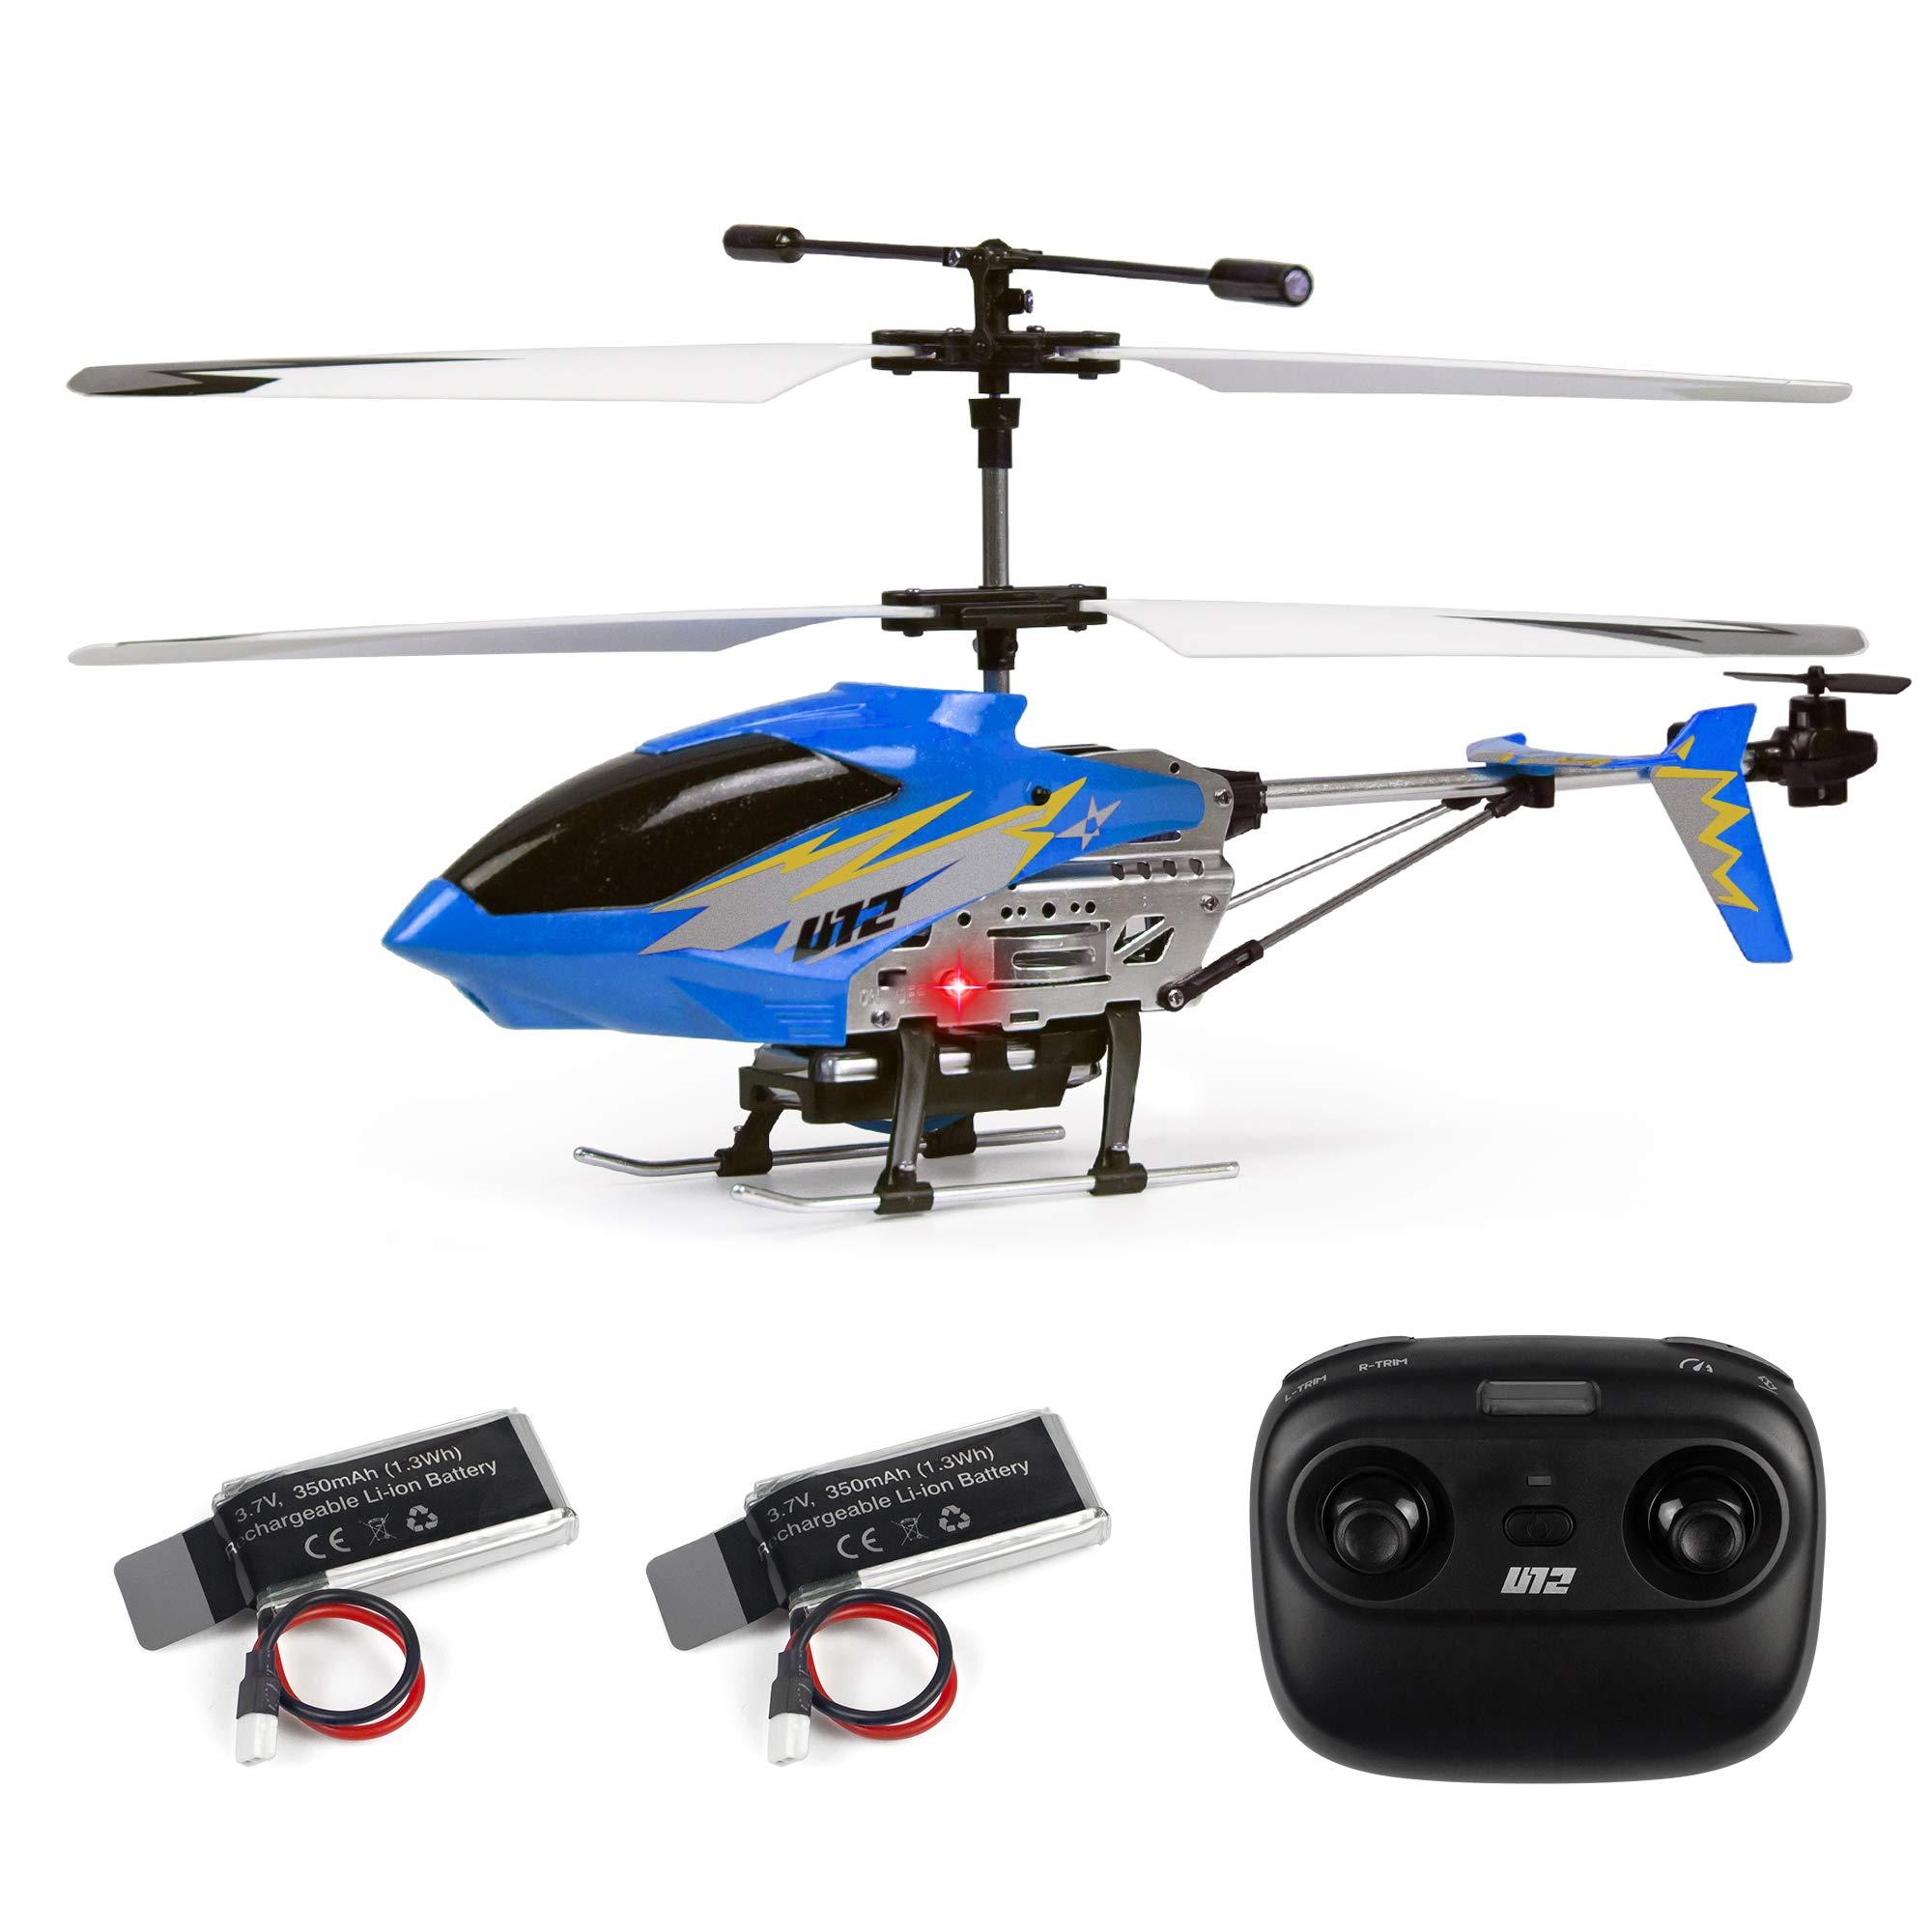 Indoor Mini Rc Helicopter: Maximizing Indoor Mini RC Helicopter Flight Time